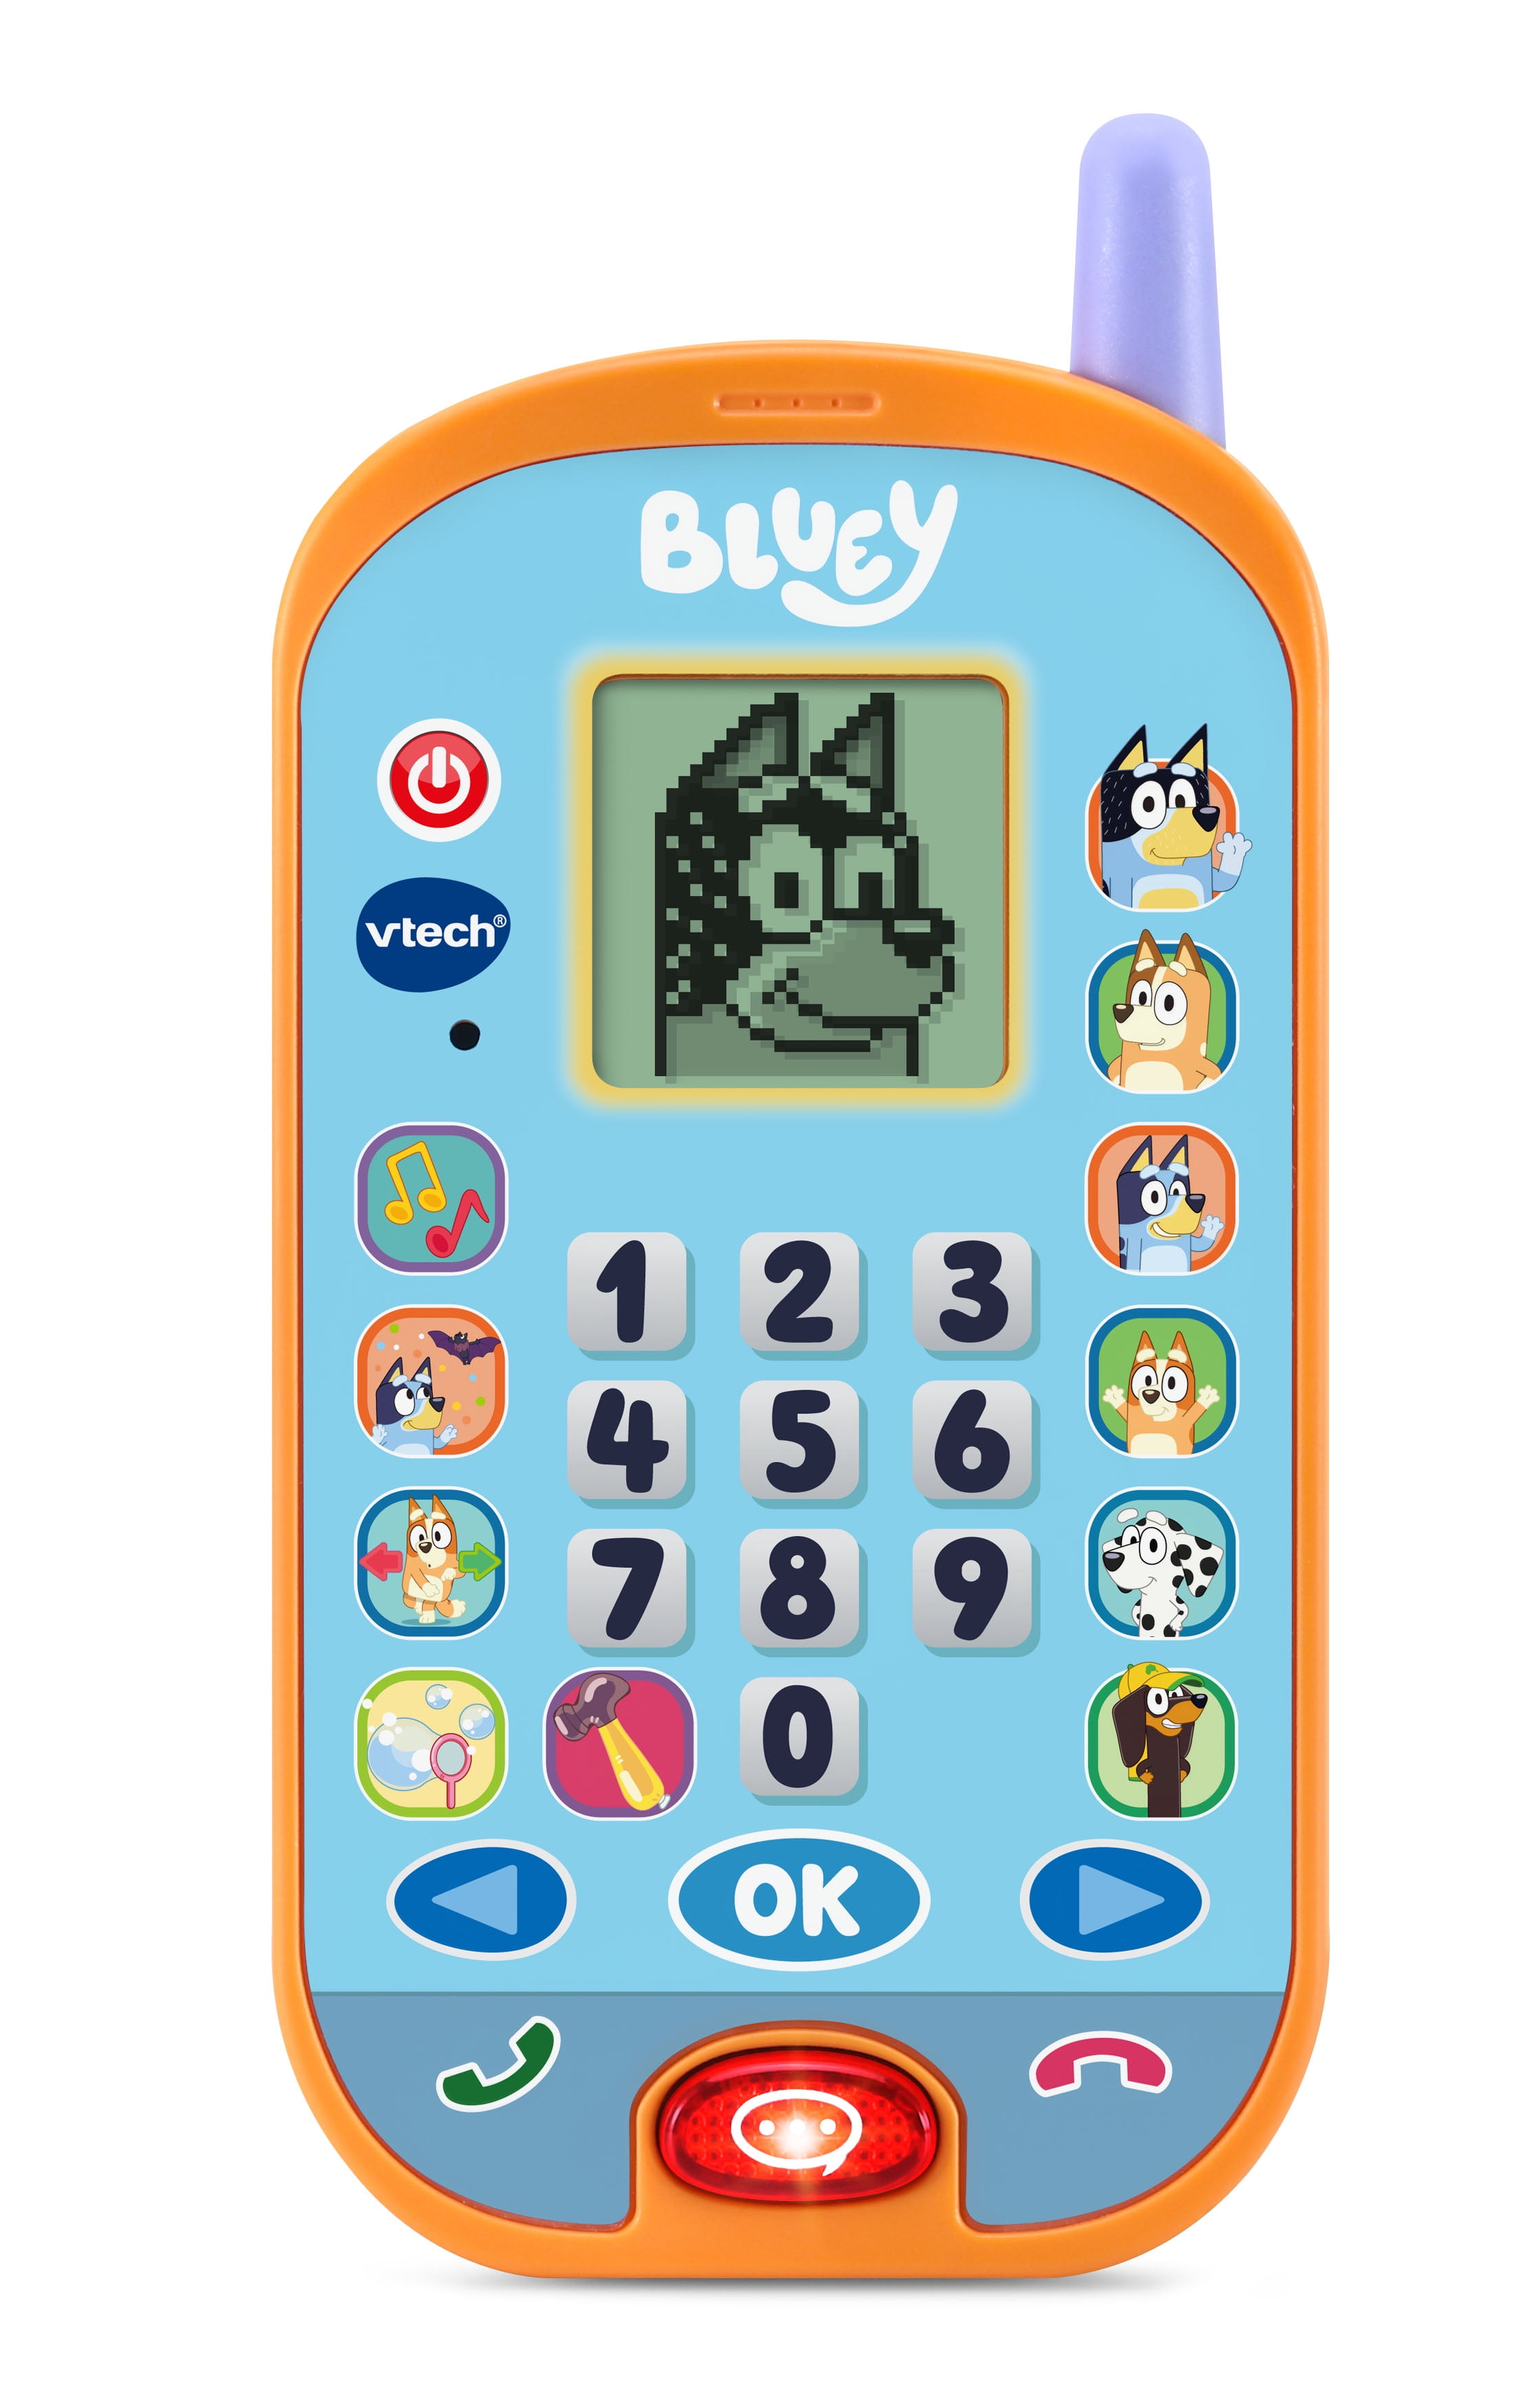 VTech Bluey Ring Ring Phone with Pretend Phone Apps and Games for Kids,  Unisex Toy 